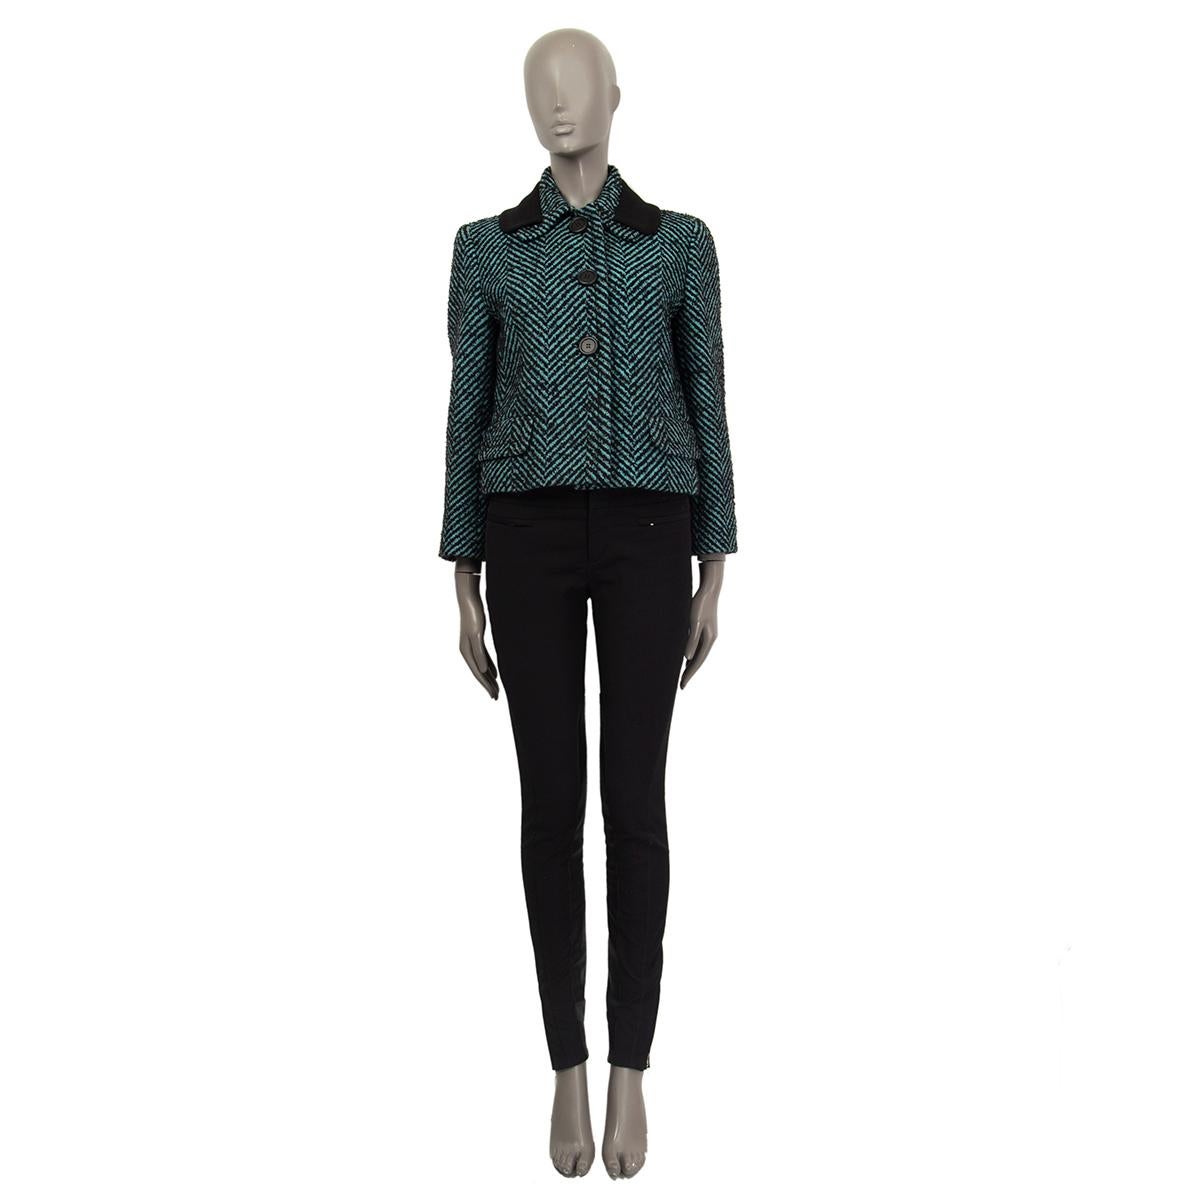 100% authentic Prada cropped tweed jacket in black, turquoise and grey boucle virgin wool (66%) mohair (18%) polyamide (16%) with double layered collar, herringbone tweed , two flap pockets, 3/4 sleeve length with buttoned cuffs in the back. Lined